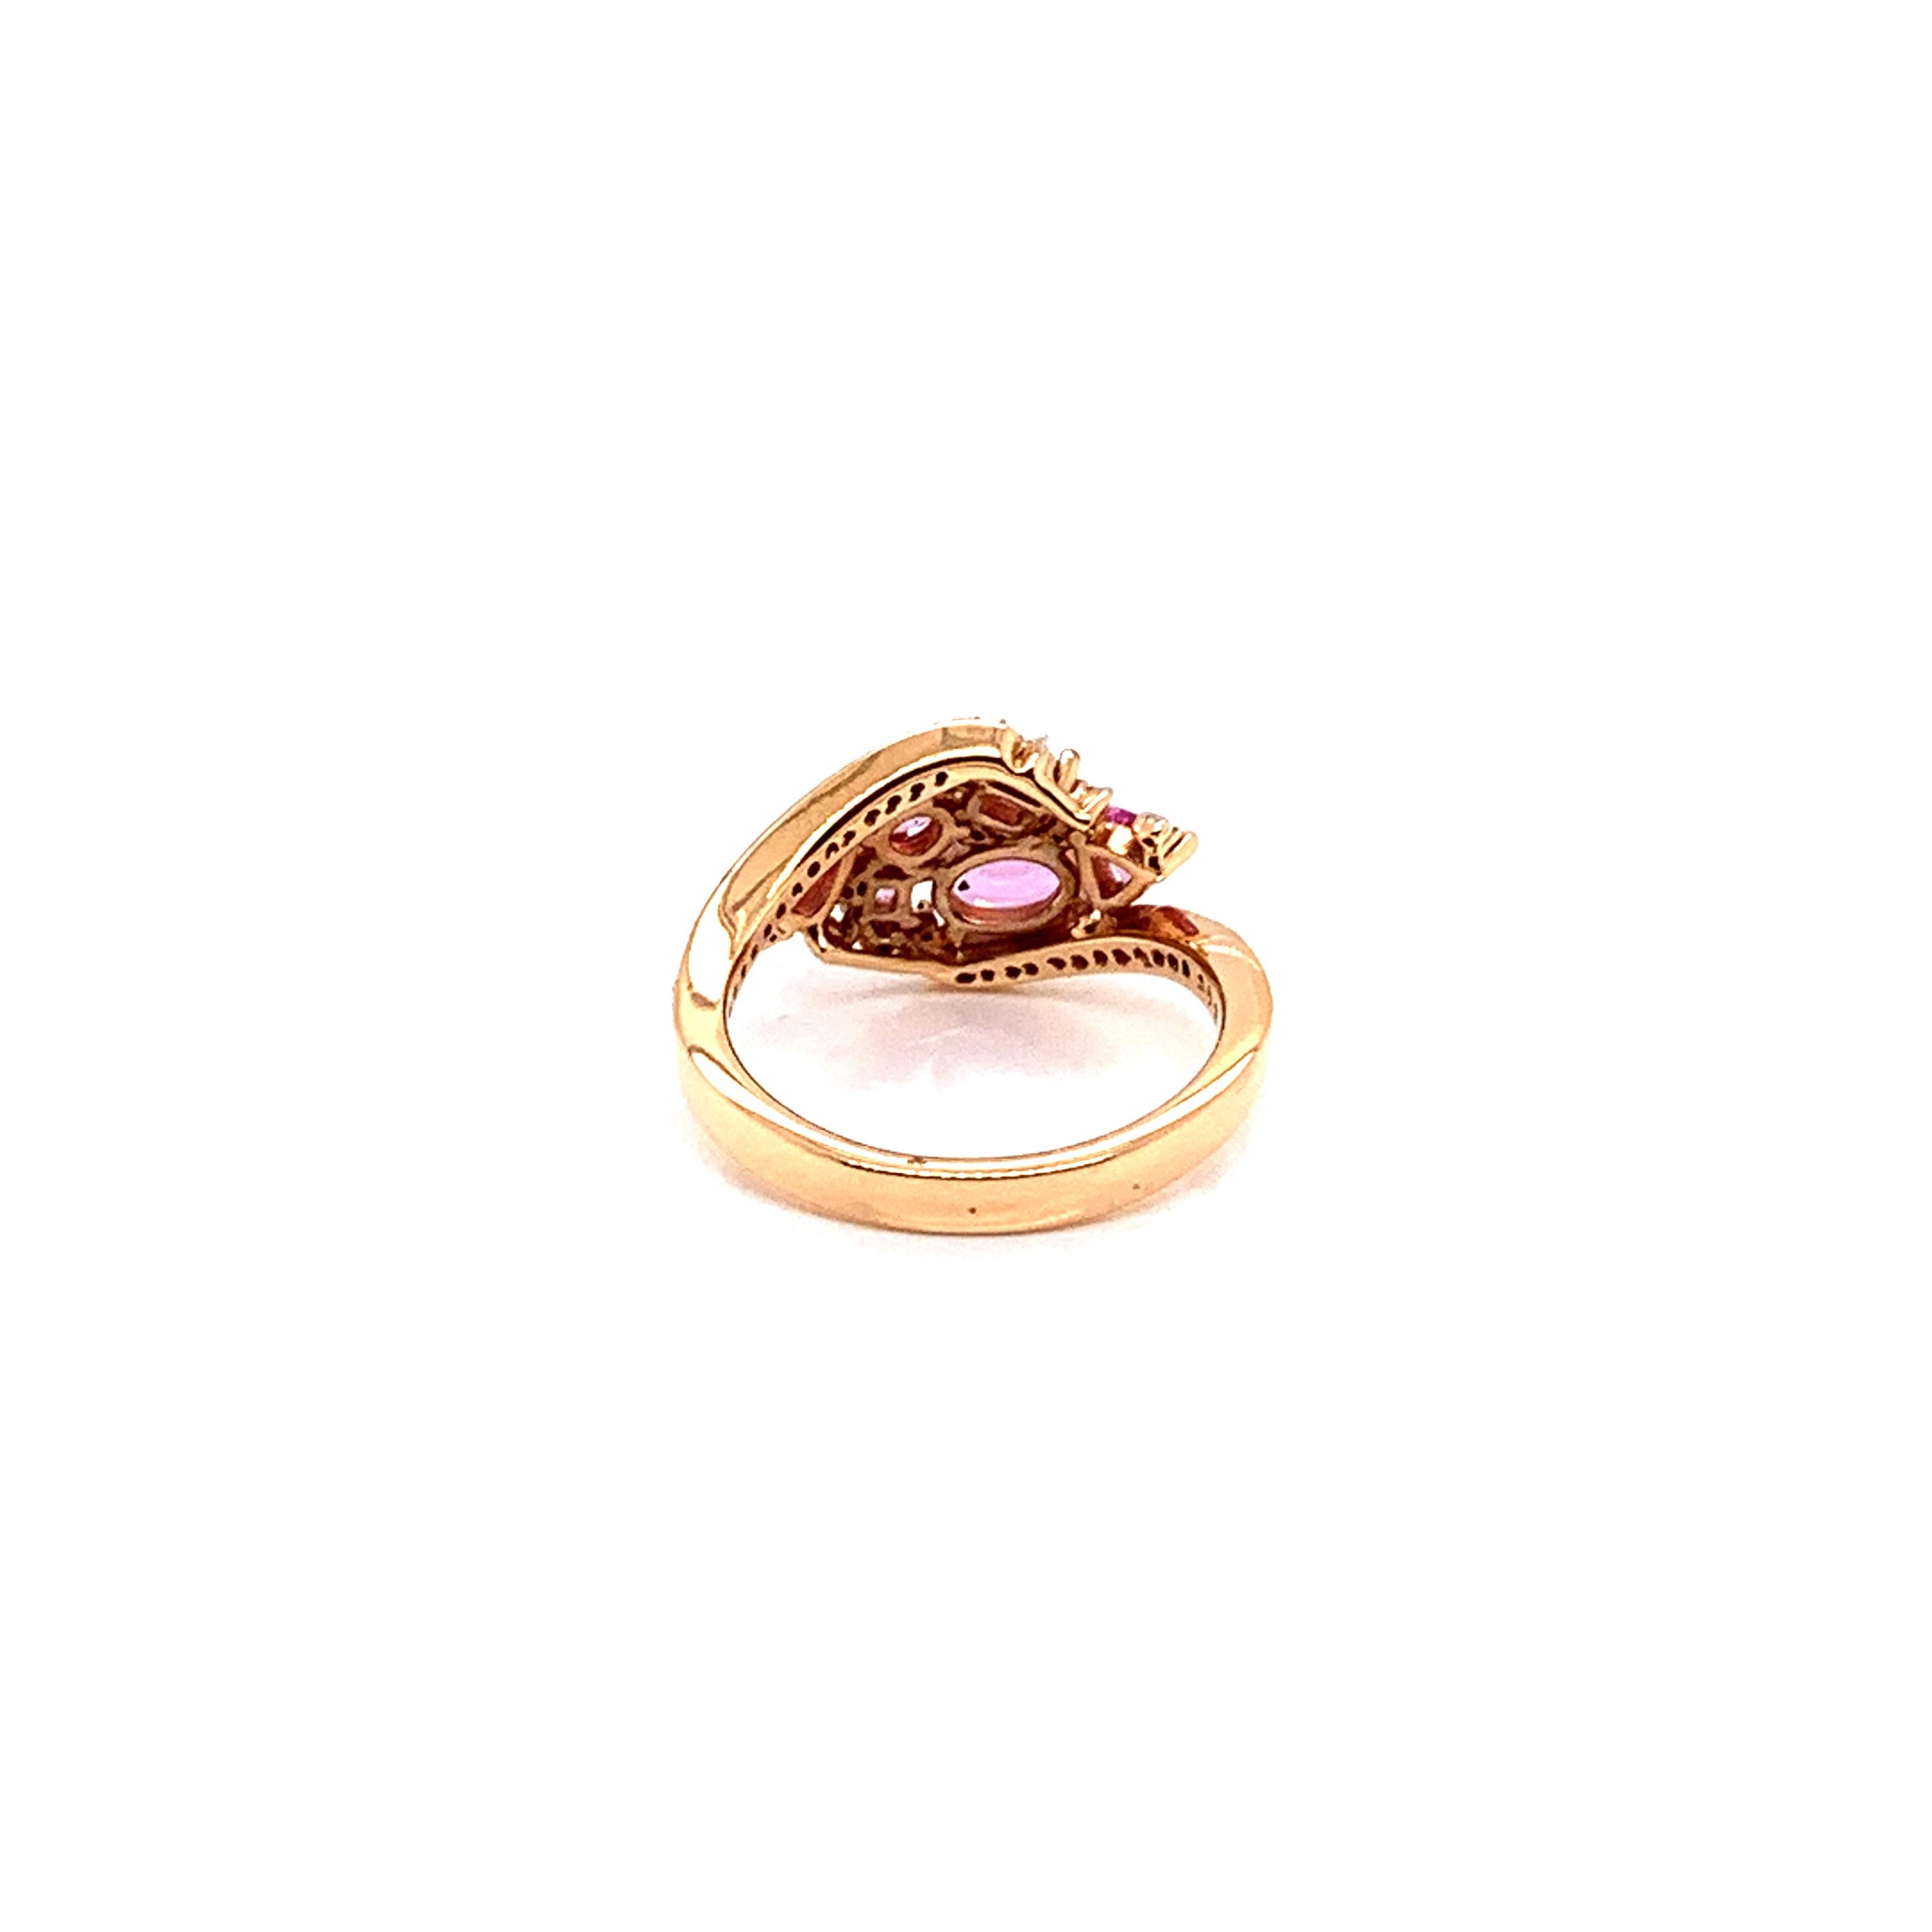 1.4 Carat Pink Sapphire Ring in 18 Karat Rose Gold with Diamond For Sale 2